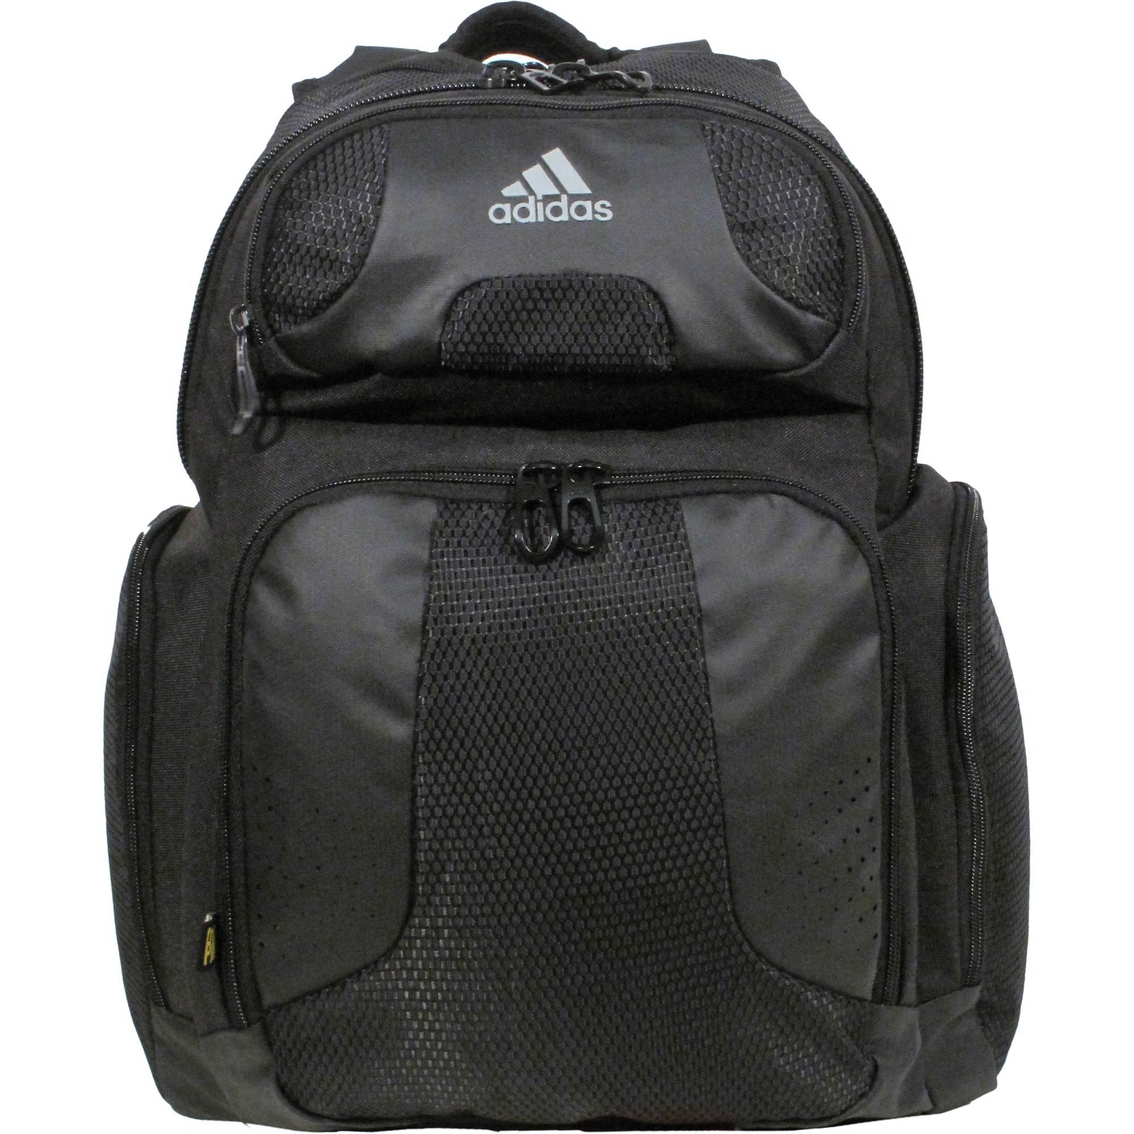 Backpack | Backpacks | Clothing & Accessories | Shop The Exchange